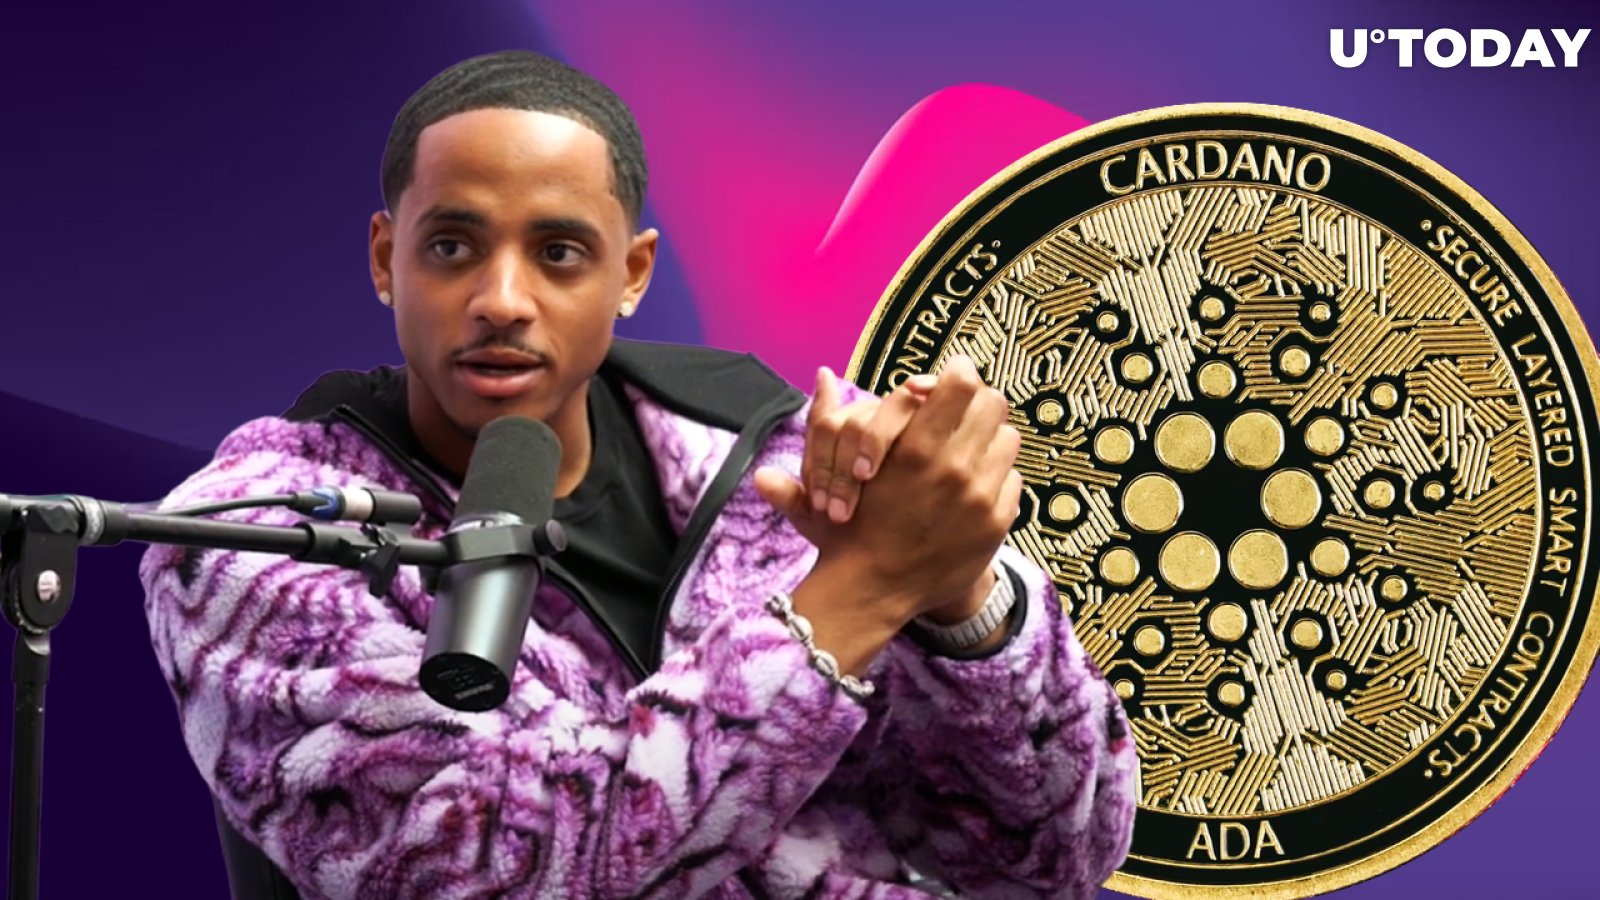 Snoop Dogg's Son Is a Die-Hard Cardano Supporter, Teases Upcoming NFT Release